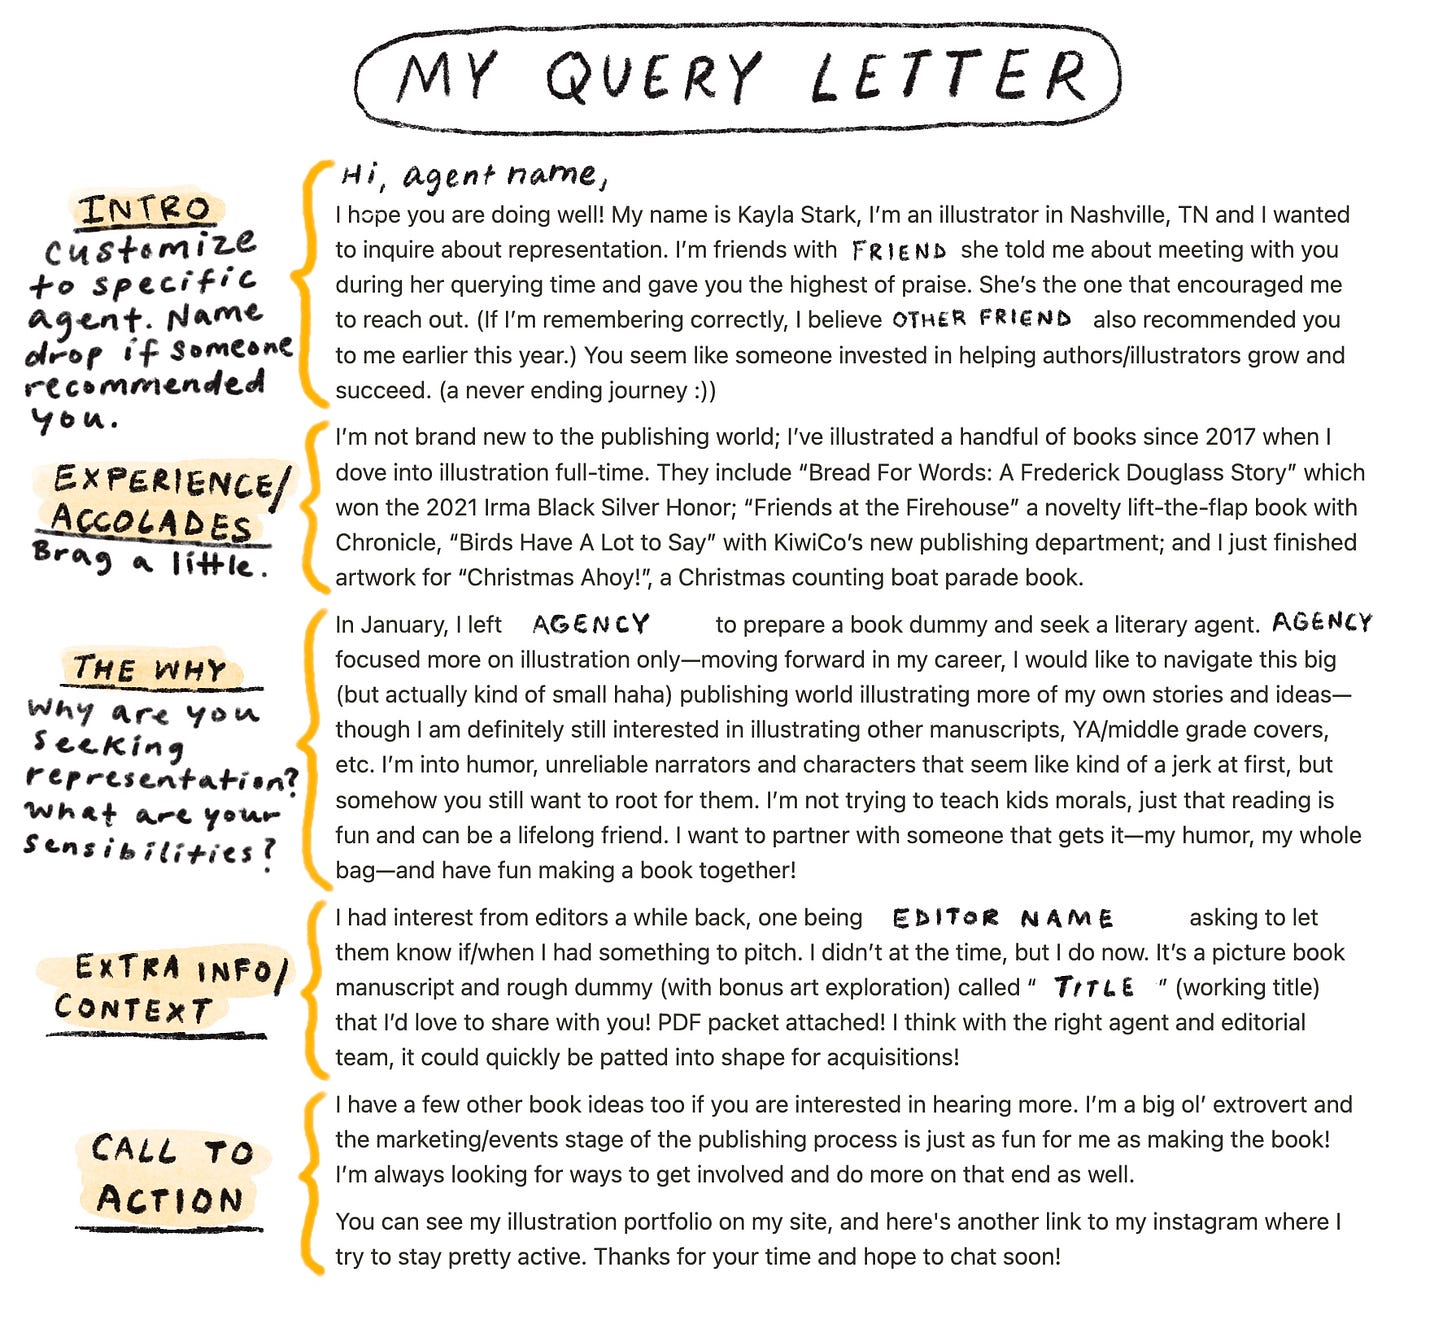 example of a query letter by Kayla Stark